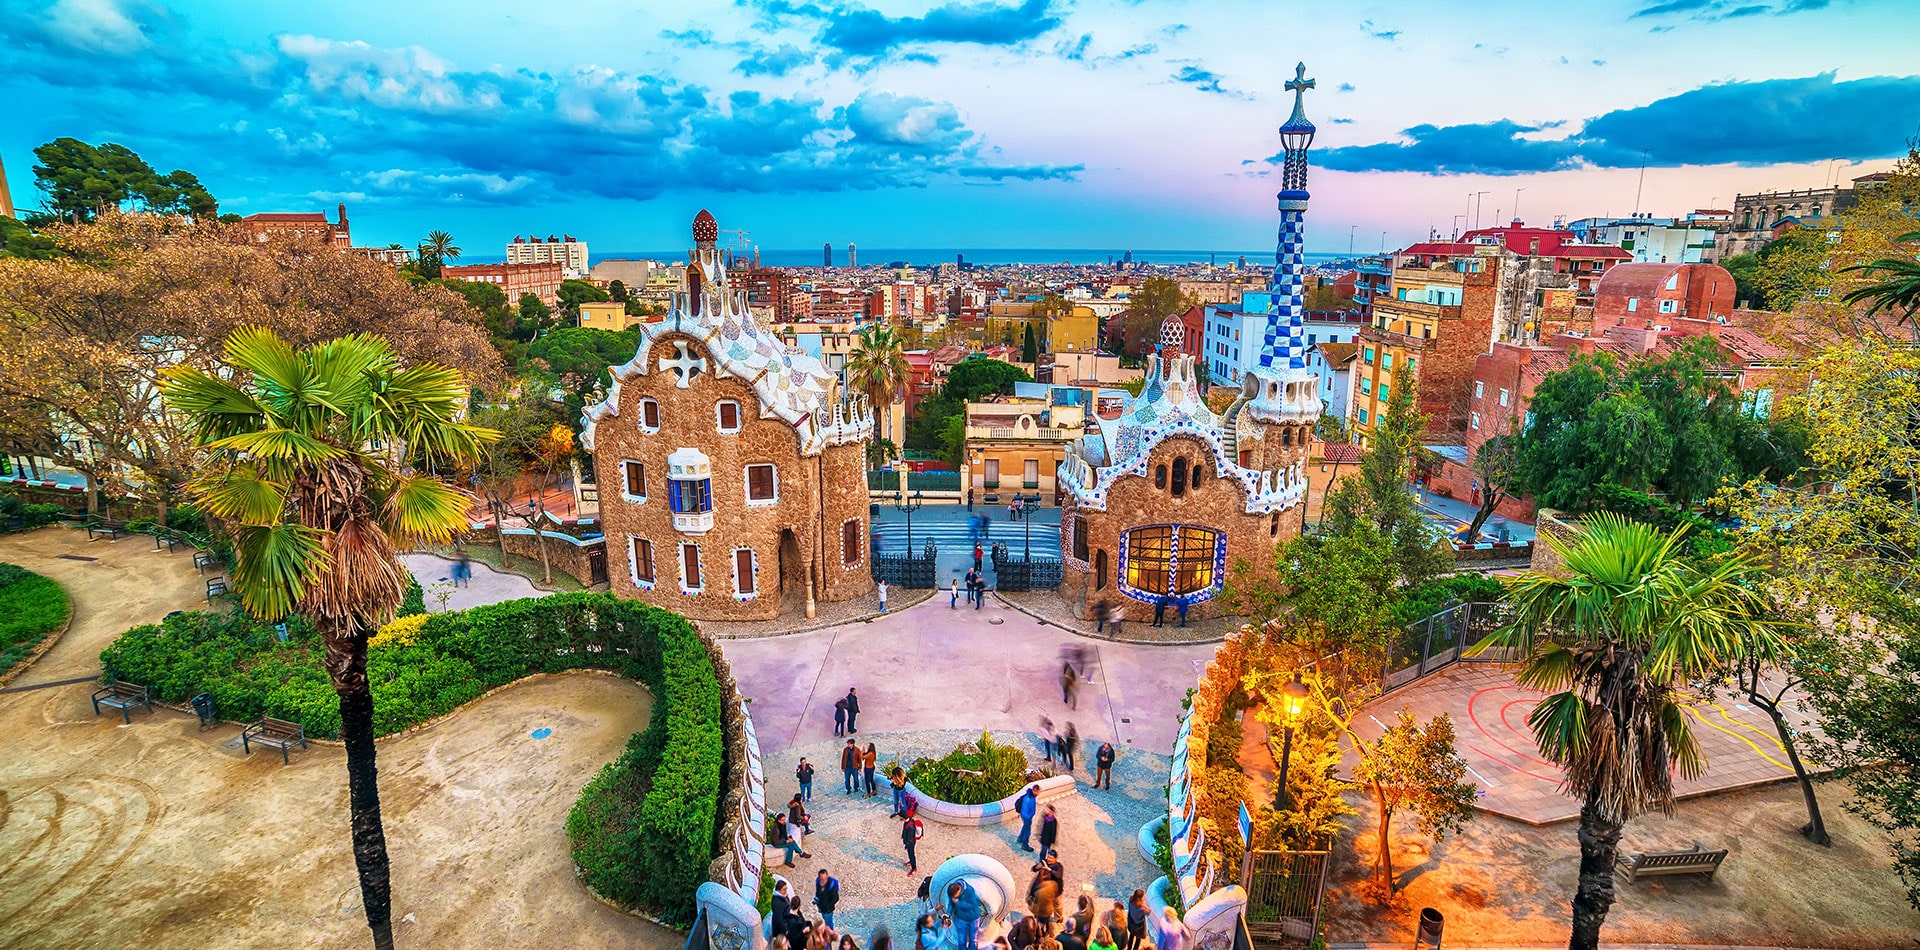 Parc Guell in Barcelona, Spain